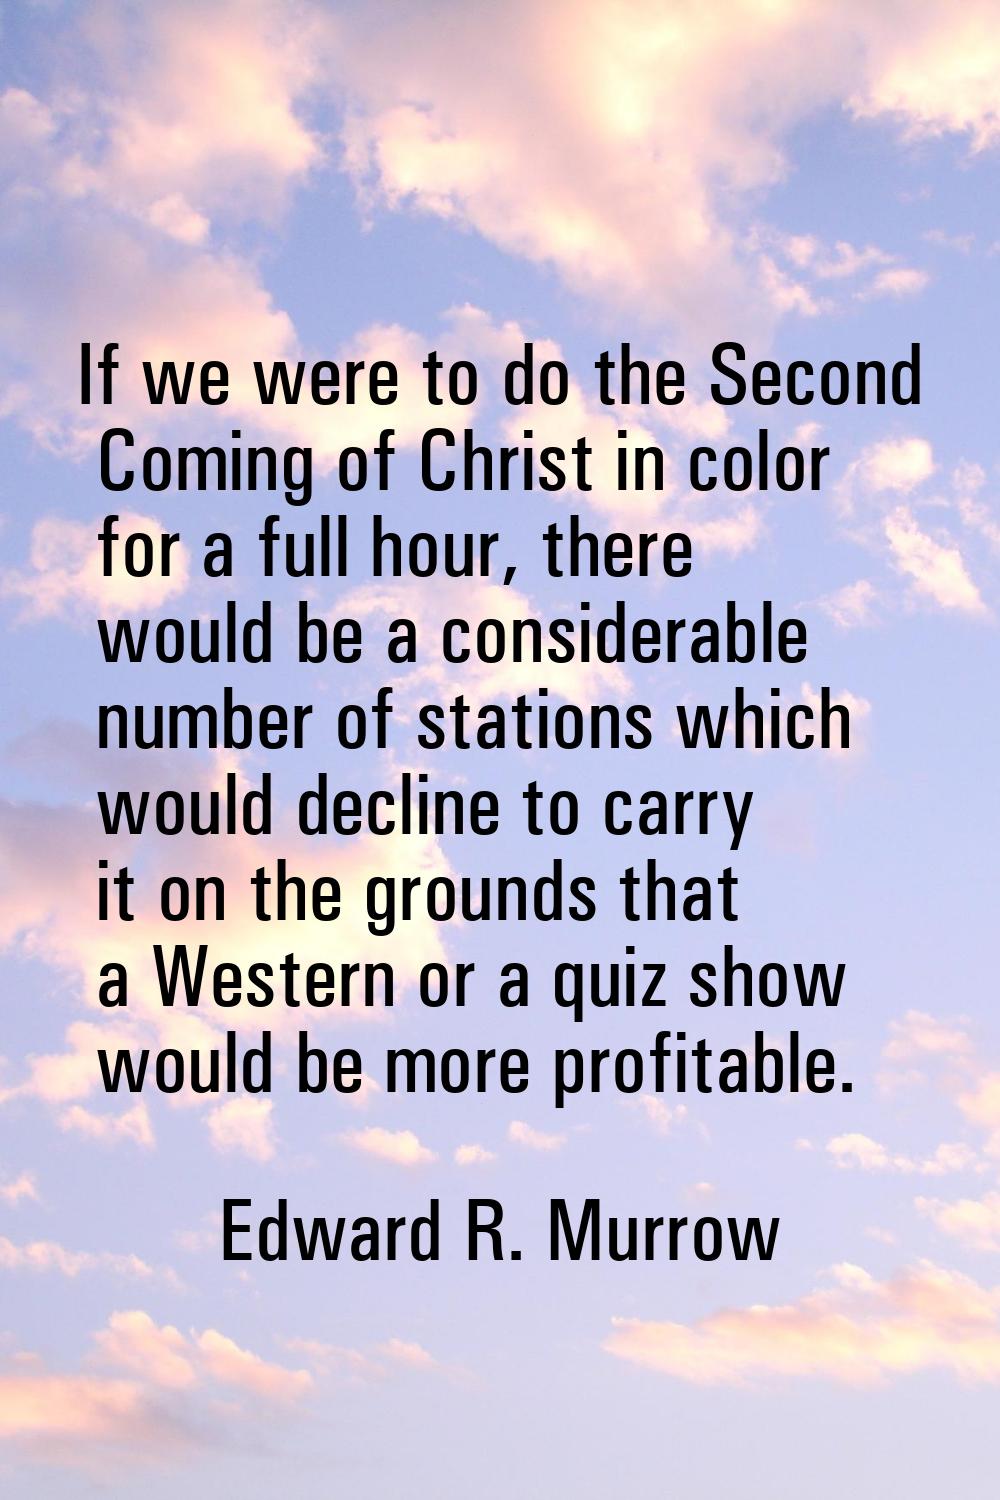 If we were to do the Second Coming of Christ in color for a full hour, there would be a considerabl